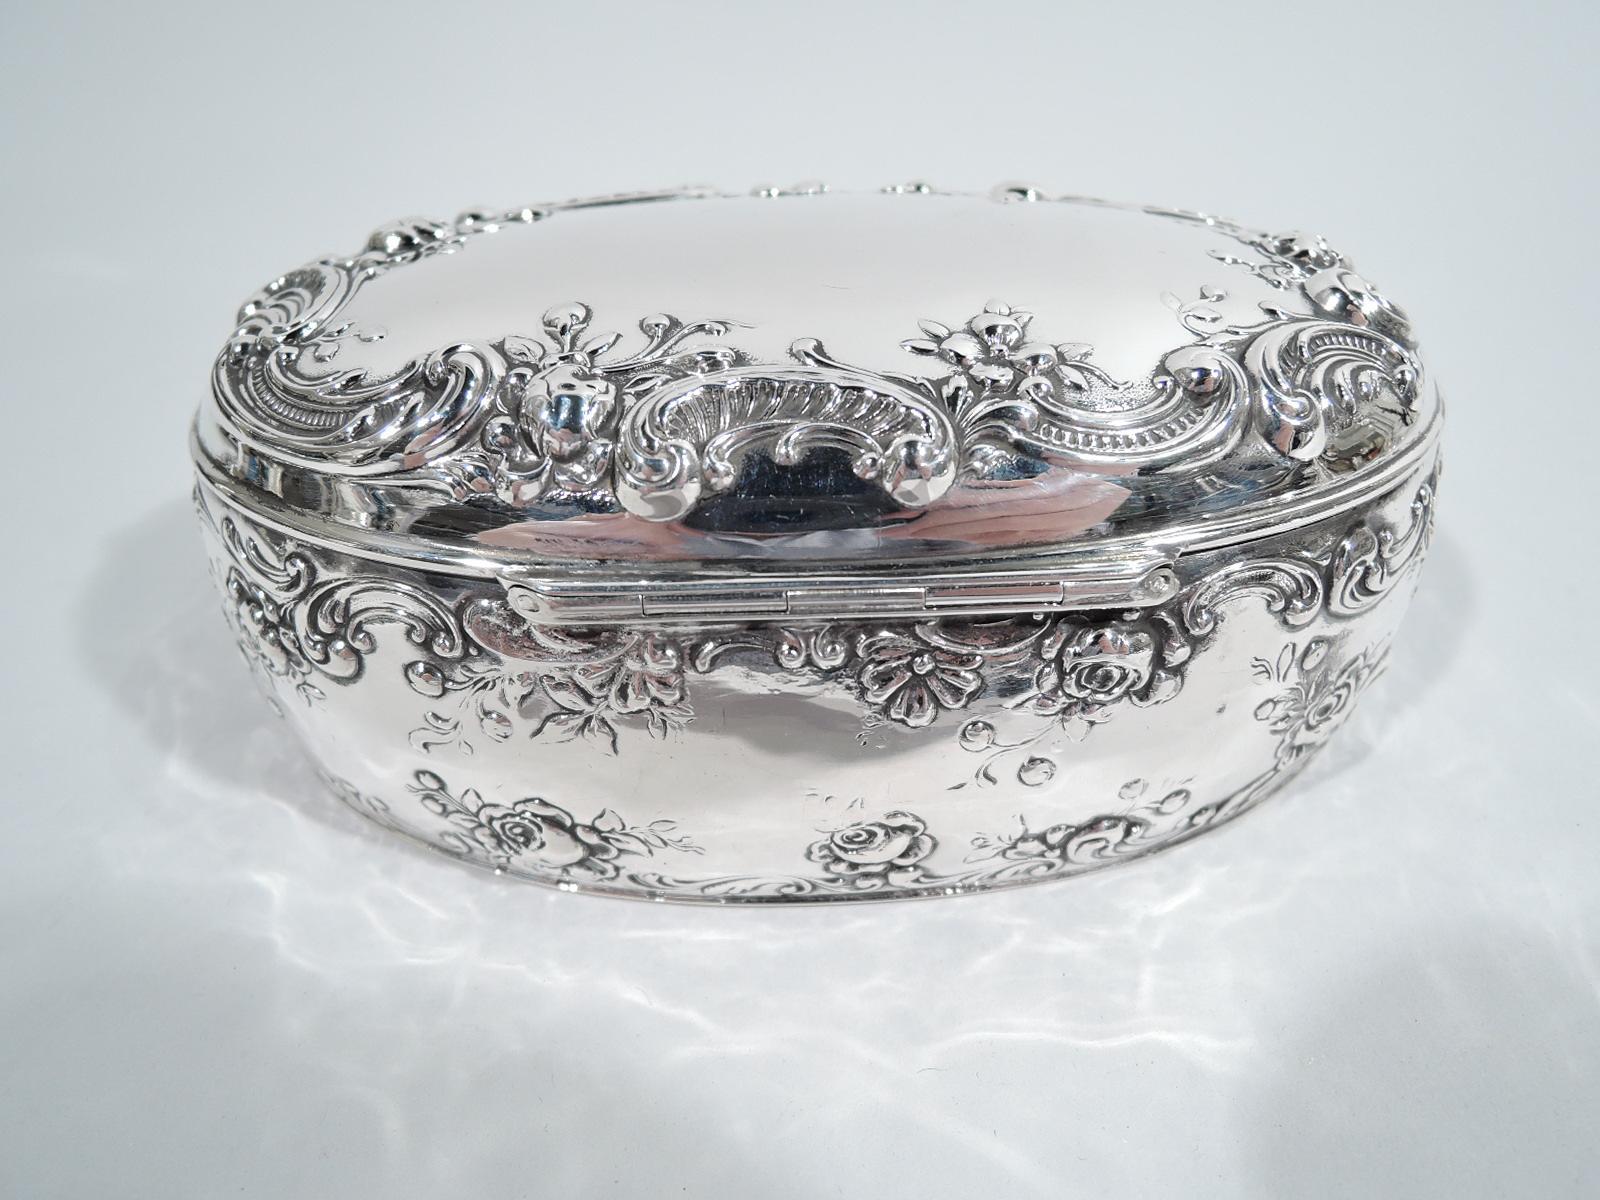 American Antique Gorham Edwardian Sterling Silver Jewelry Box